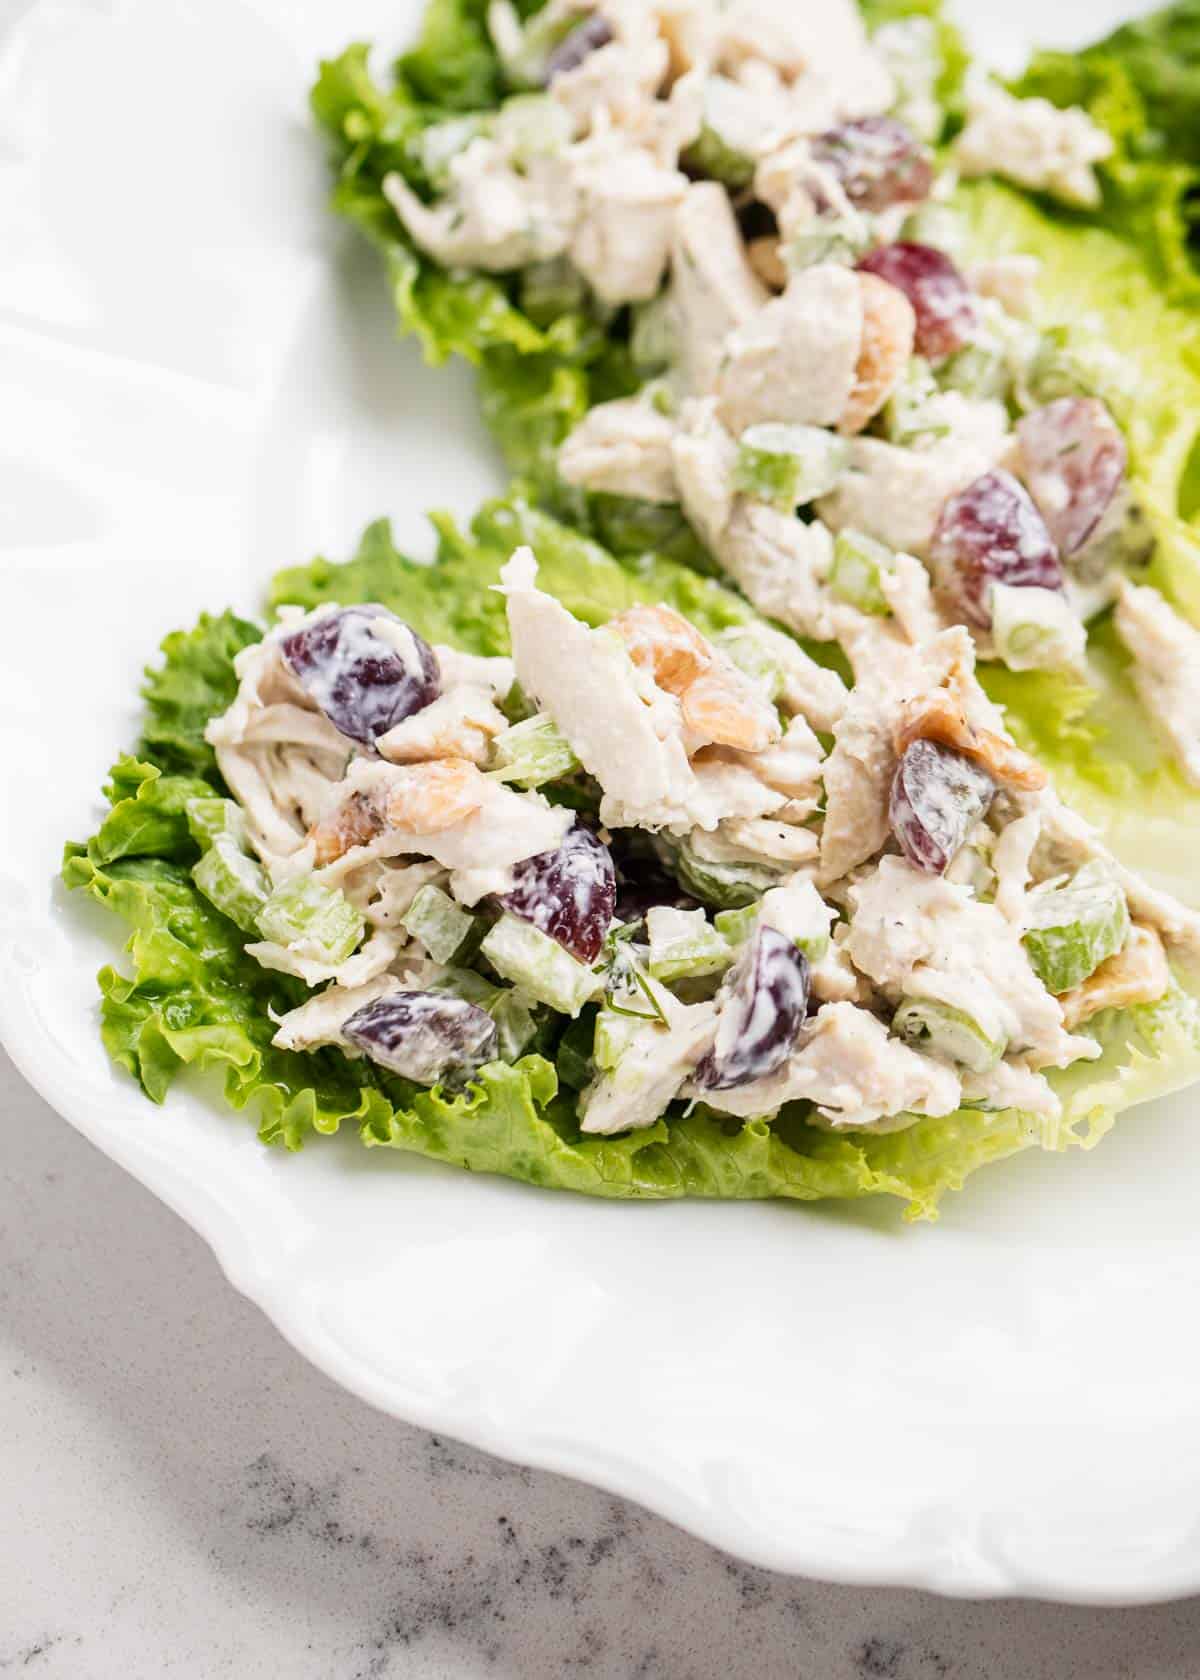 Lettuce wraps filled with chicken salad mixture. 